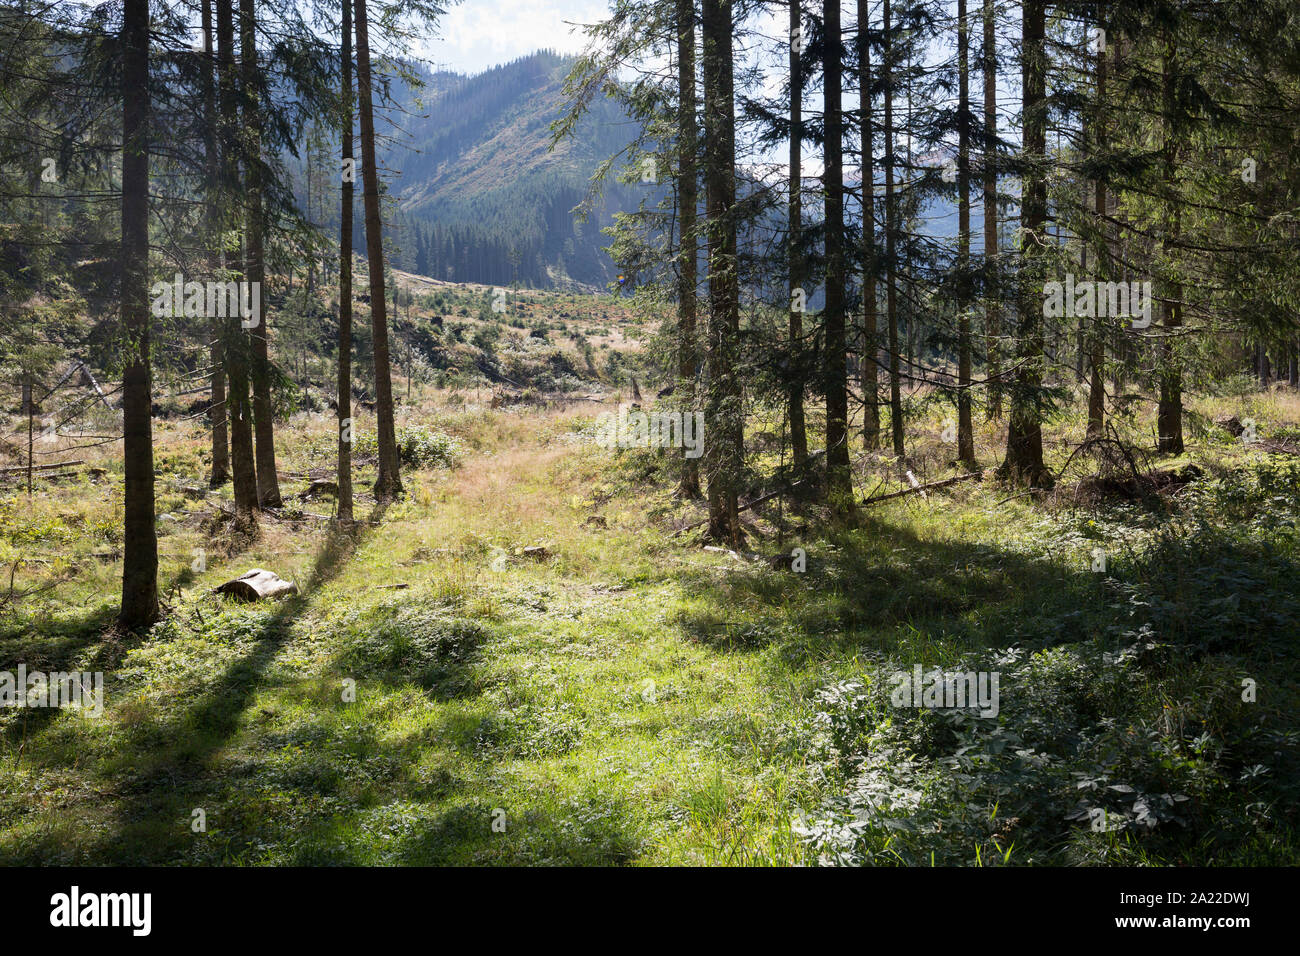 A forest landscape where spruce trees have been badly affected by the European spruce beetle, in Dolina Chocholowska a hiking route in the Polish Tatra mountains, on 17th September 2019, near Zakopane, Malopolska, Poland.The European spruce beetle (Ips typographus) is one of 116 bark beetles species in Poland which is killing thousands of spruces. The insect's population can grow rapidly via wind and snow etc. which eventually leaves a gap in the landscape, thereby changing the forest floor's ecology. Stock Photo